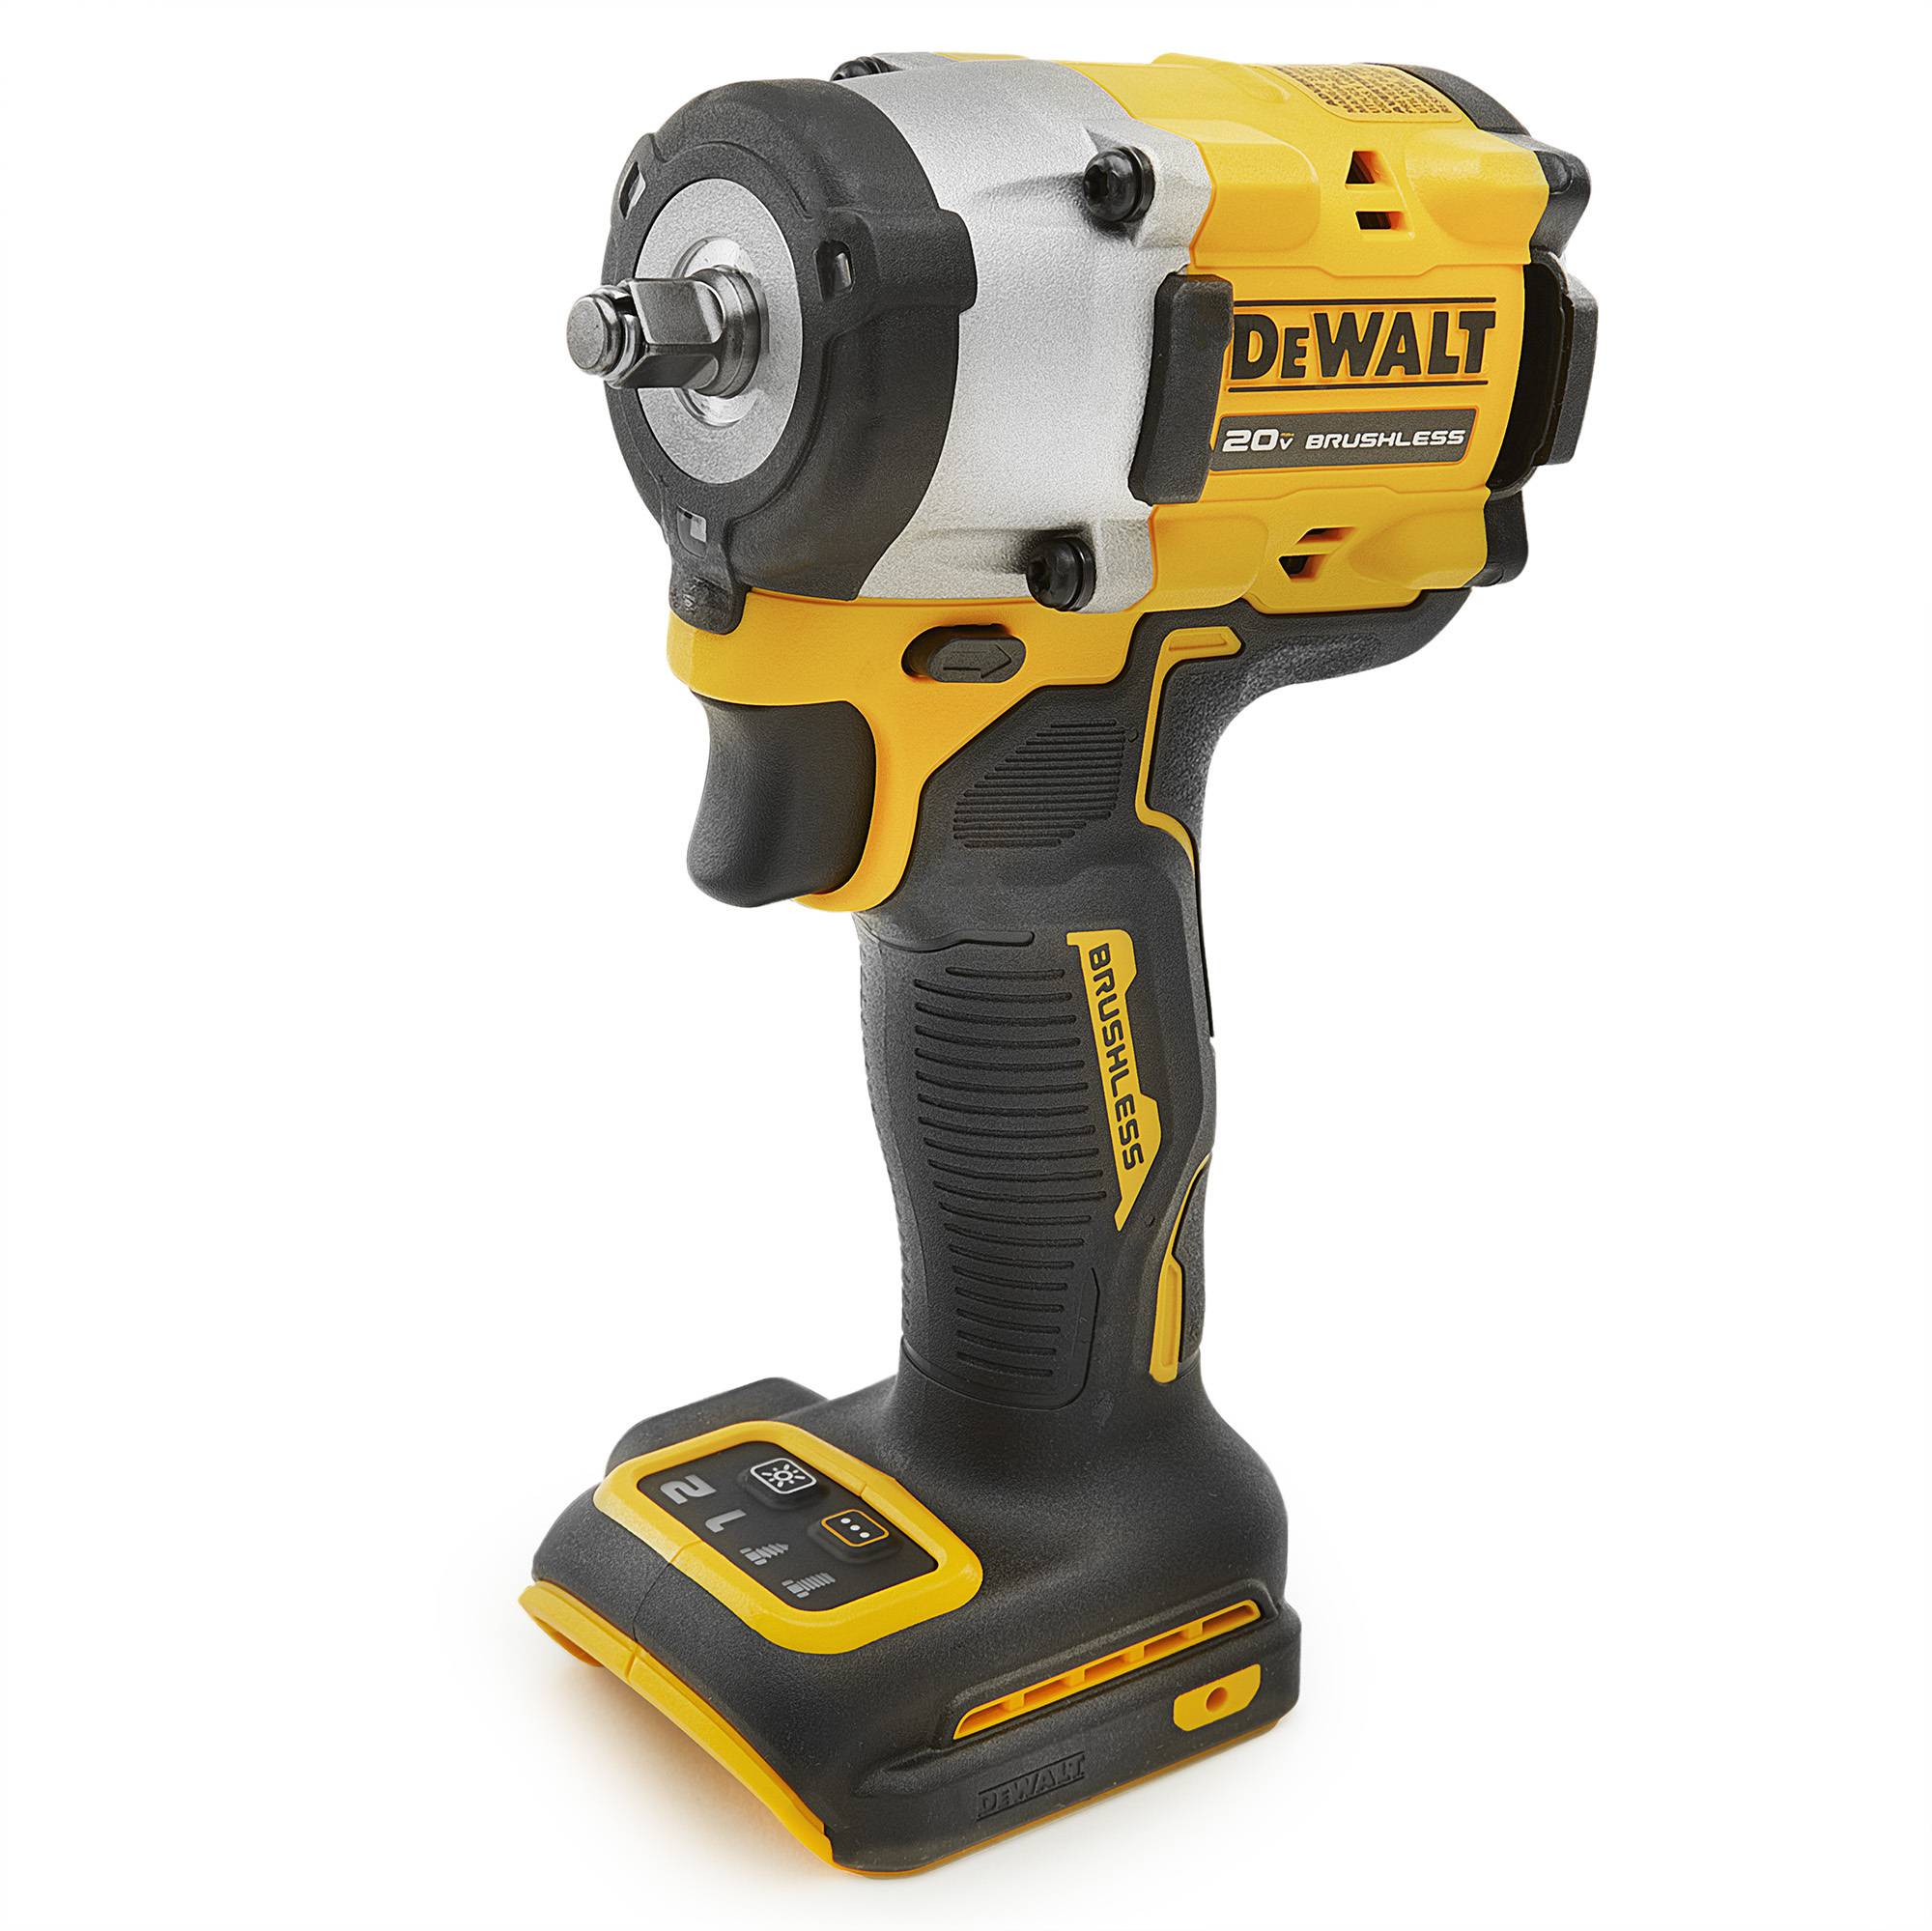 Dewalt DCF923B ATOMIC 20V MAX Brushless Lithium-Ion 3/8-Inch Cordless Impact Wrench (Tool Only)